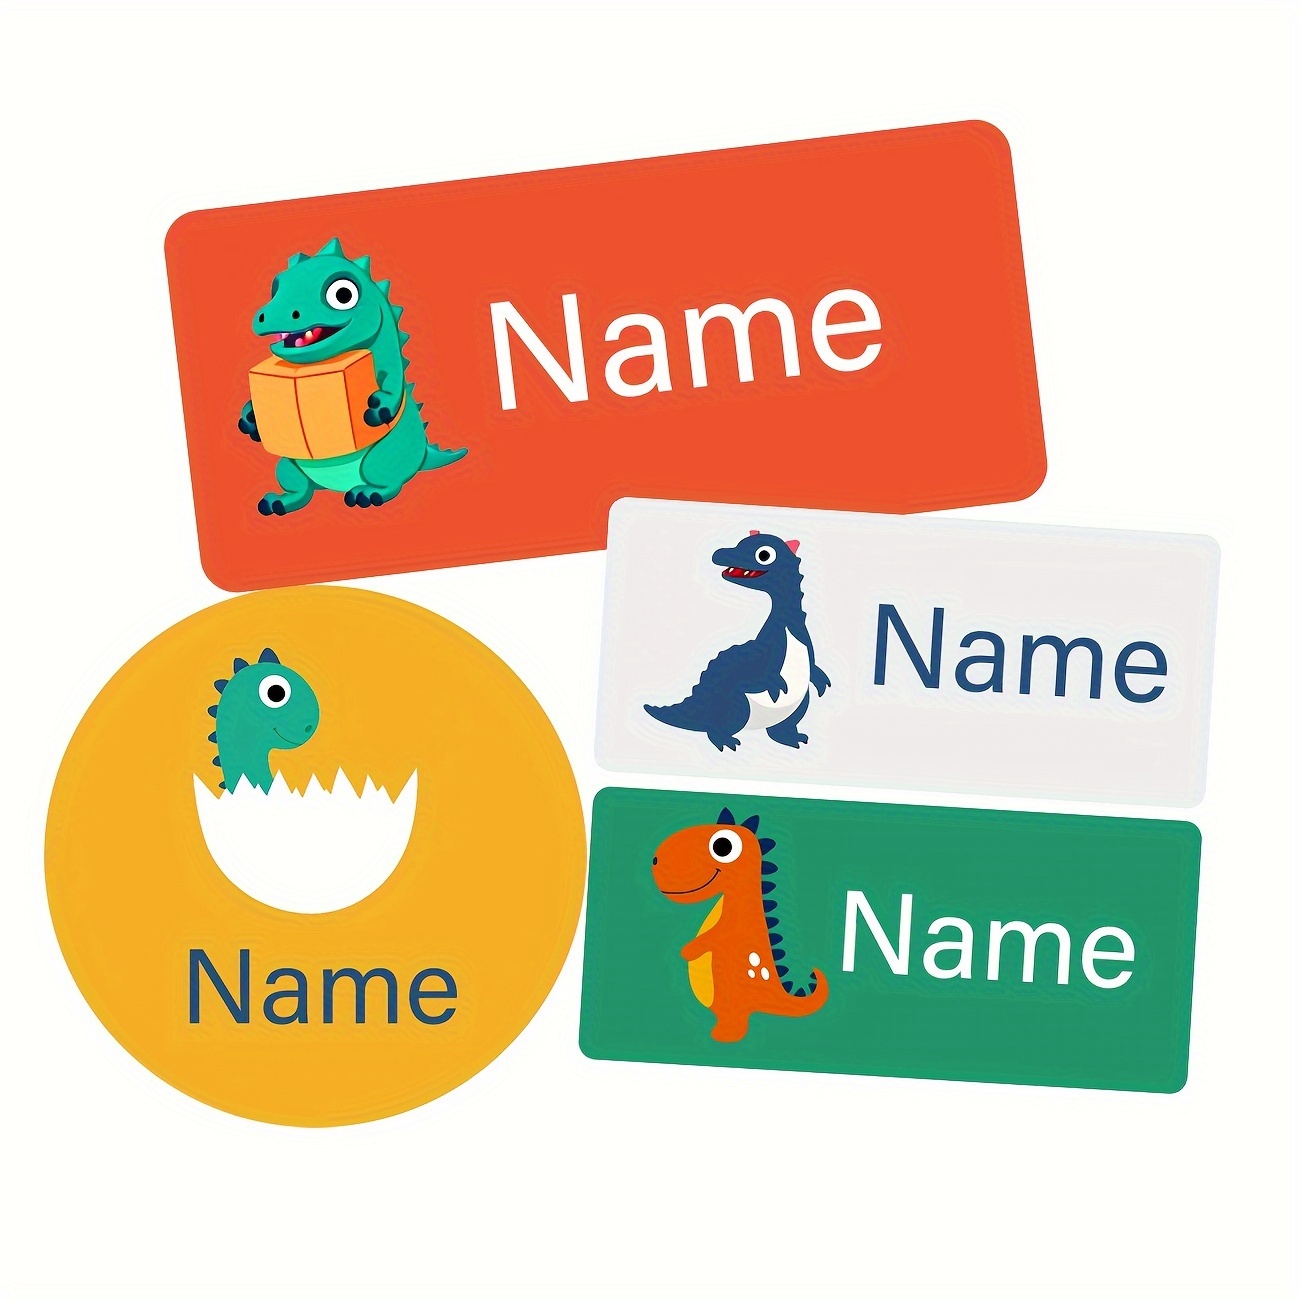 

[customized] Personalized Name Tags (62 Labels) - Custom Waterproof Name Stickers For Item Labels, Water Bottles, Lunch Boxes And School Supplies)